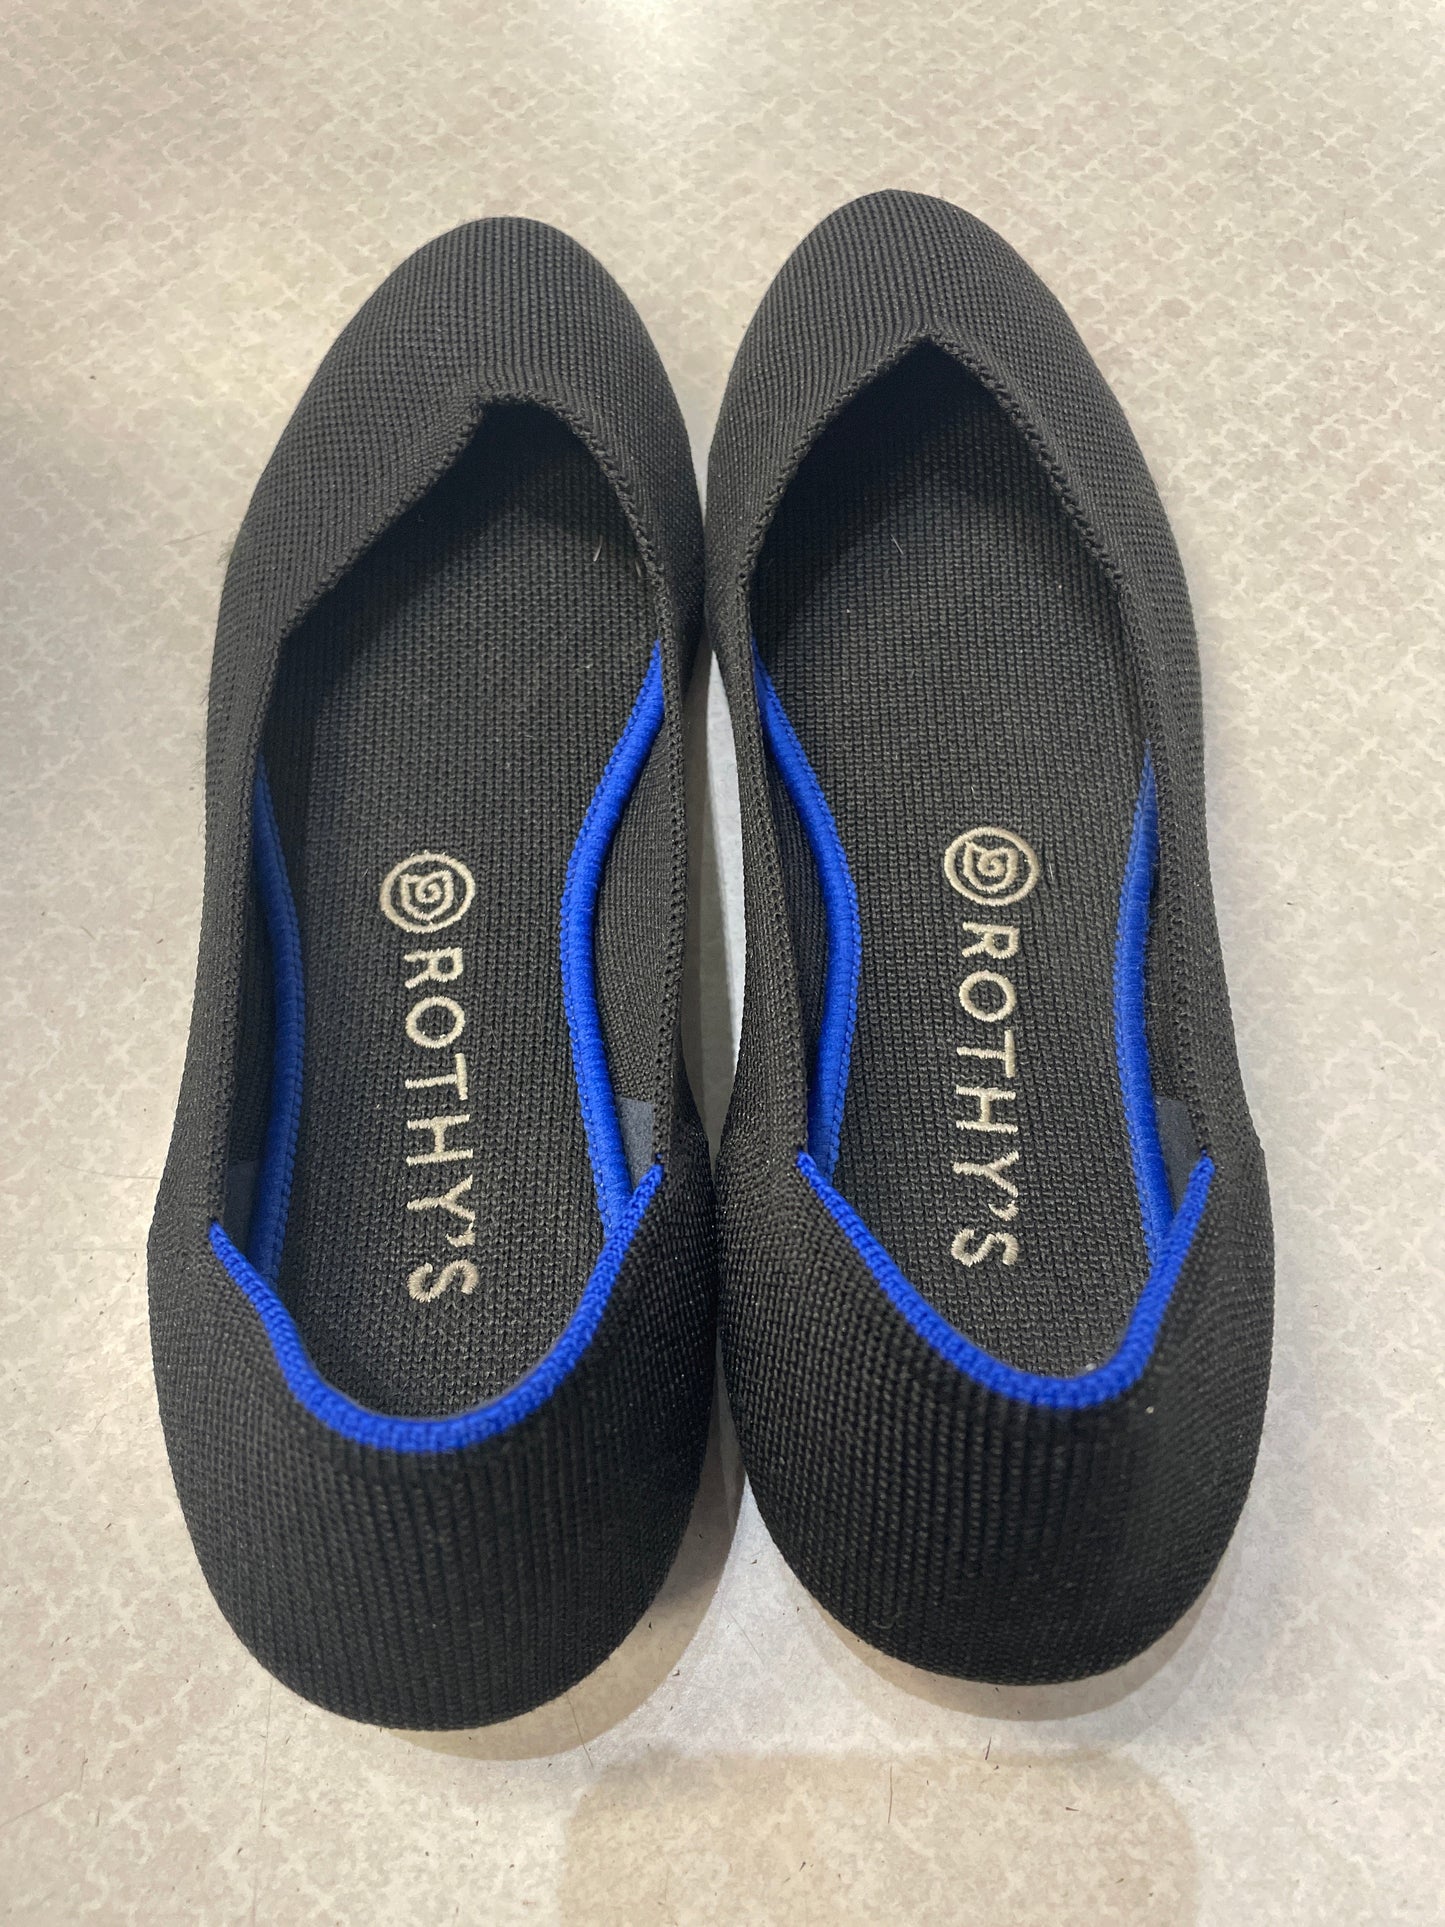 Shoes Flats By Rothys  Size: 10